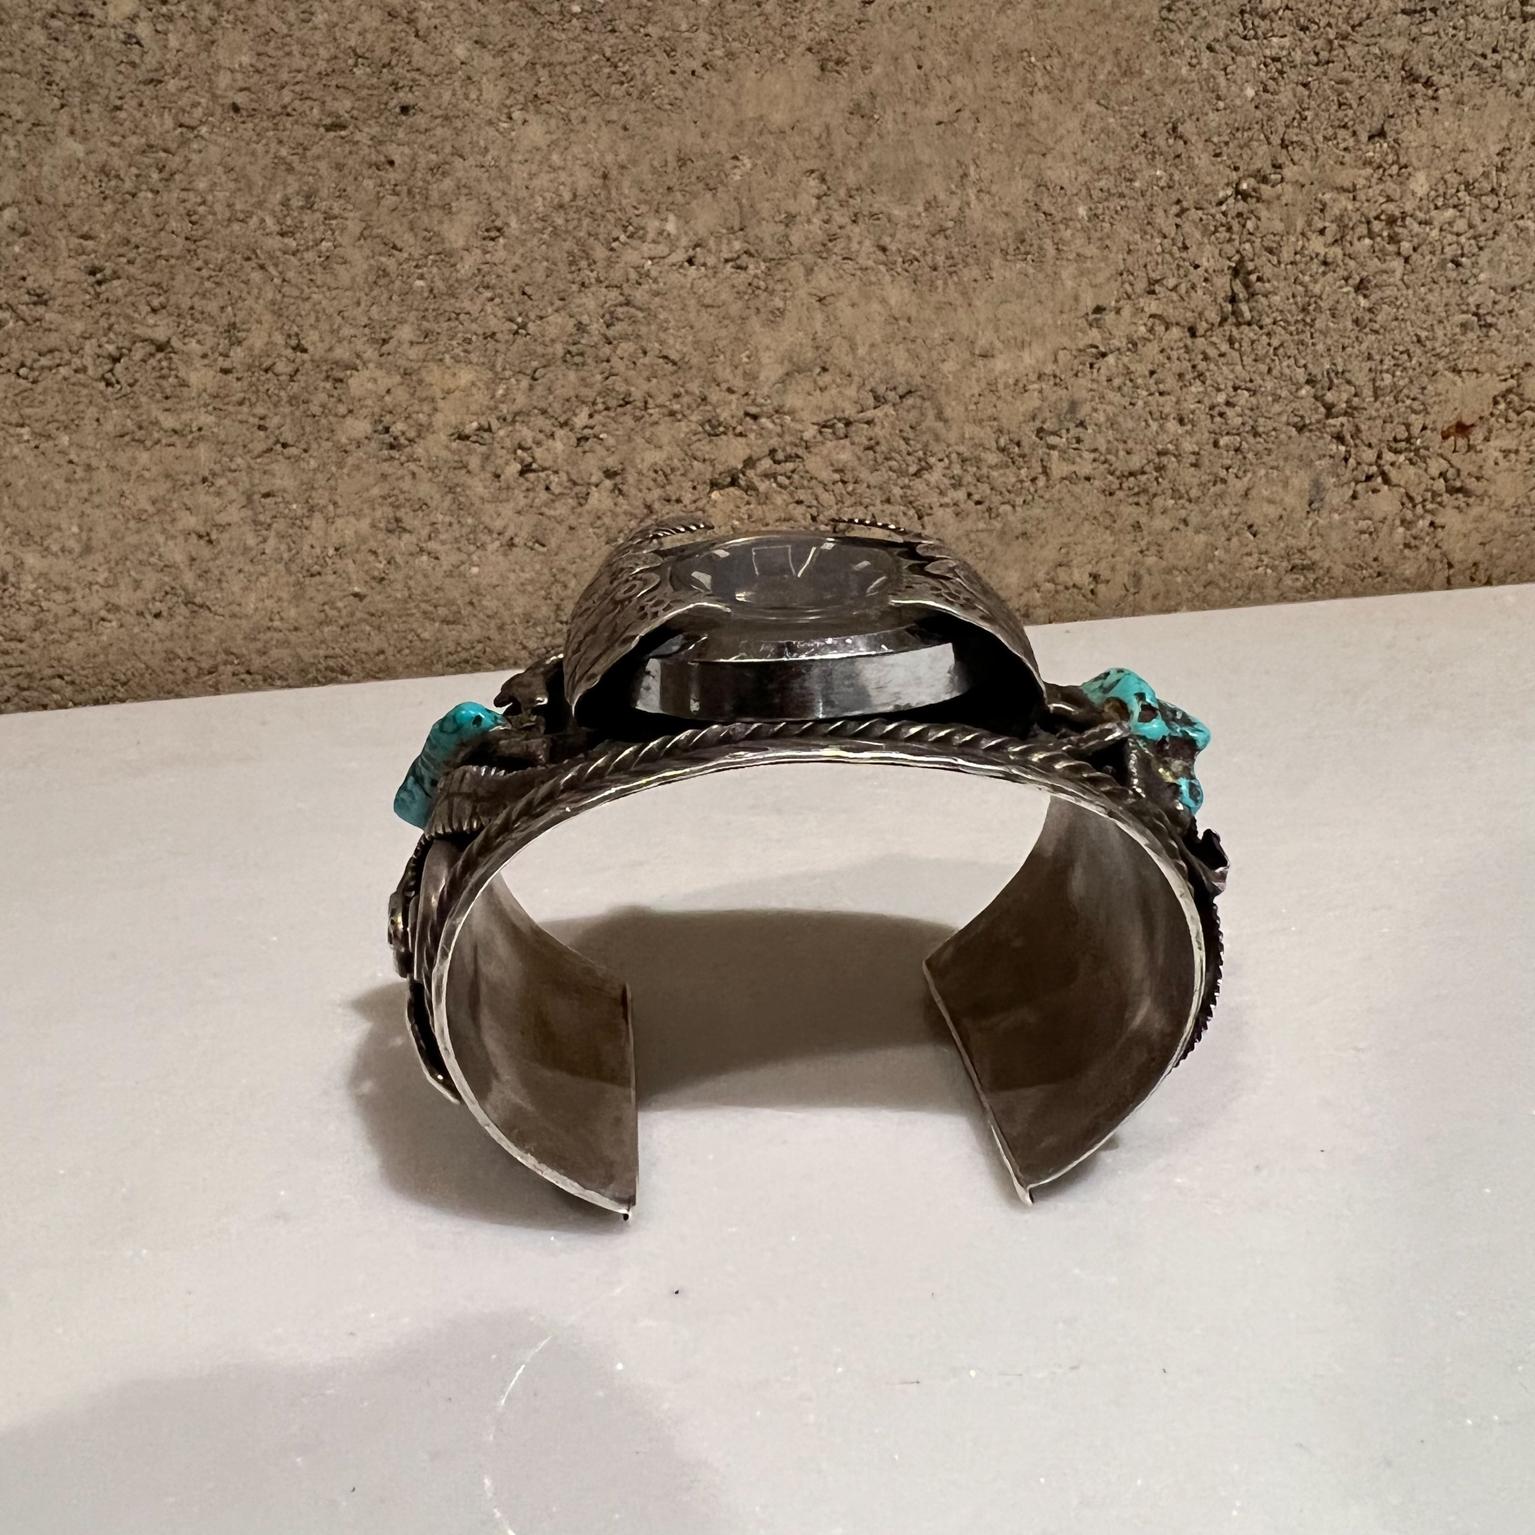 1970s Navajo Southwestern Silver and Stone Decorative Cuff Bracelet Watch Band For Sale 8